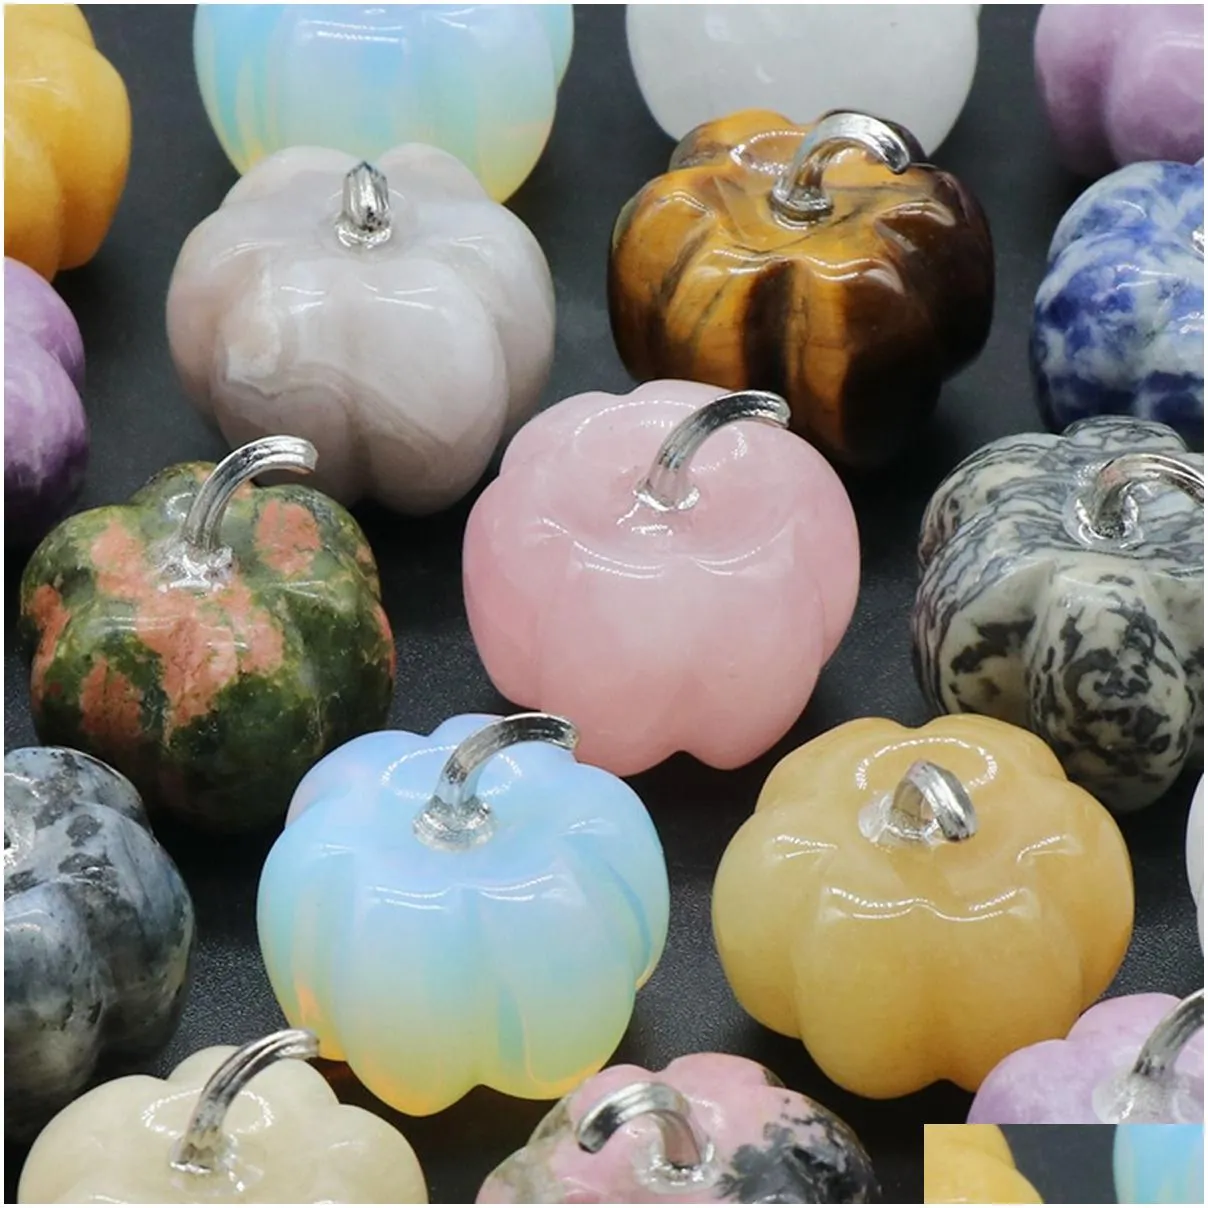 30mm Healing Pumpkin Crazy Stones Natural Crystal Hand Made Carving Pumpkin Shape Stone For Christmas Gifts